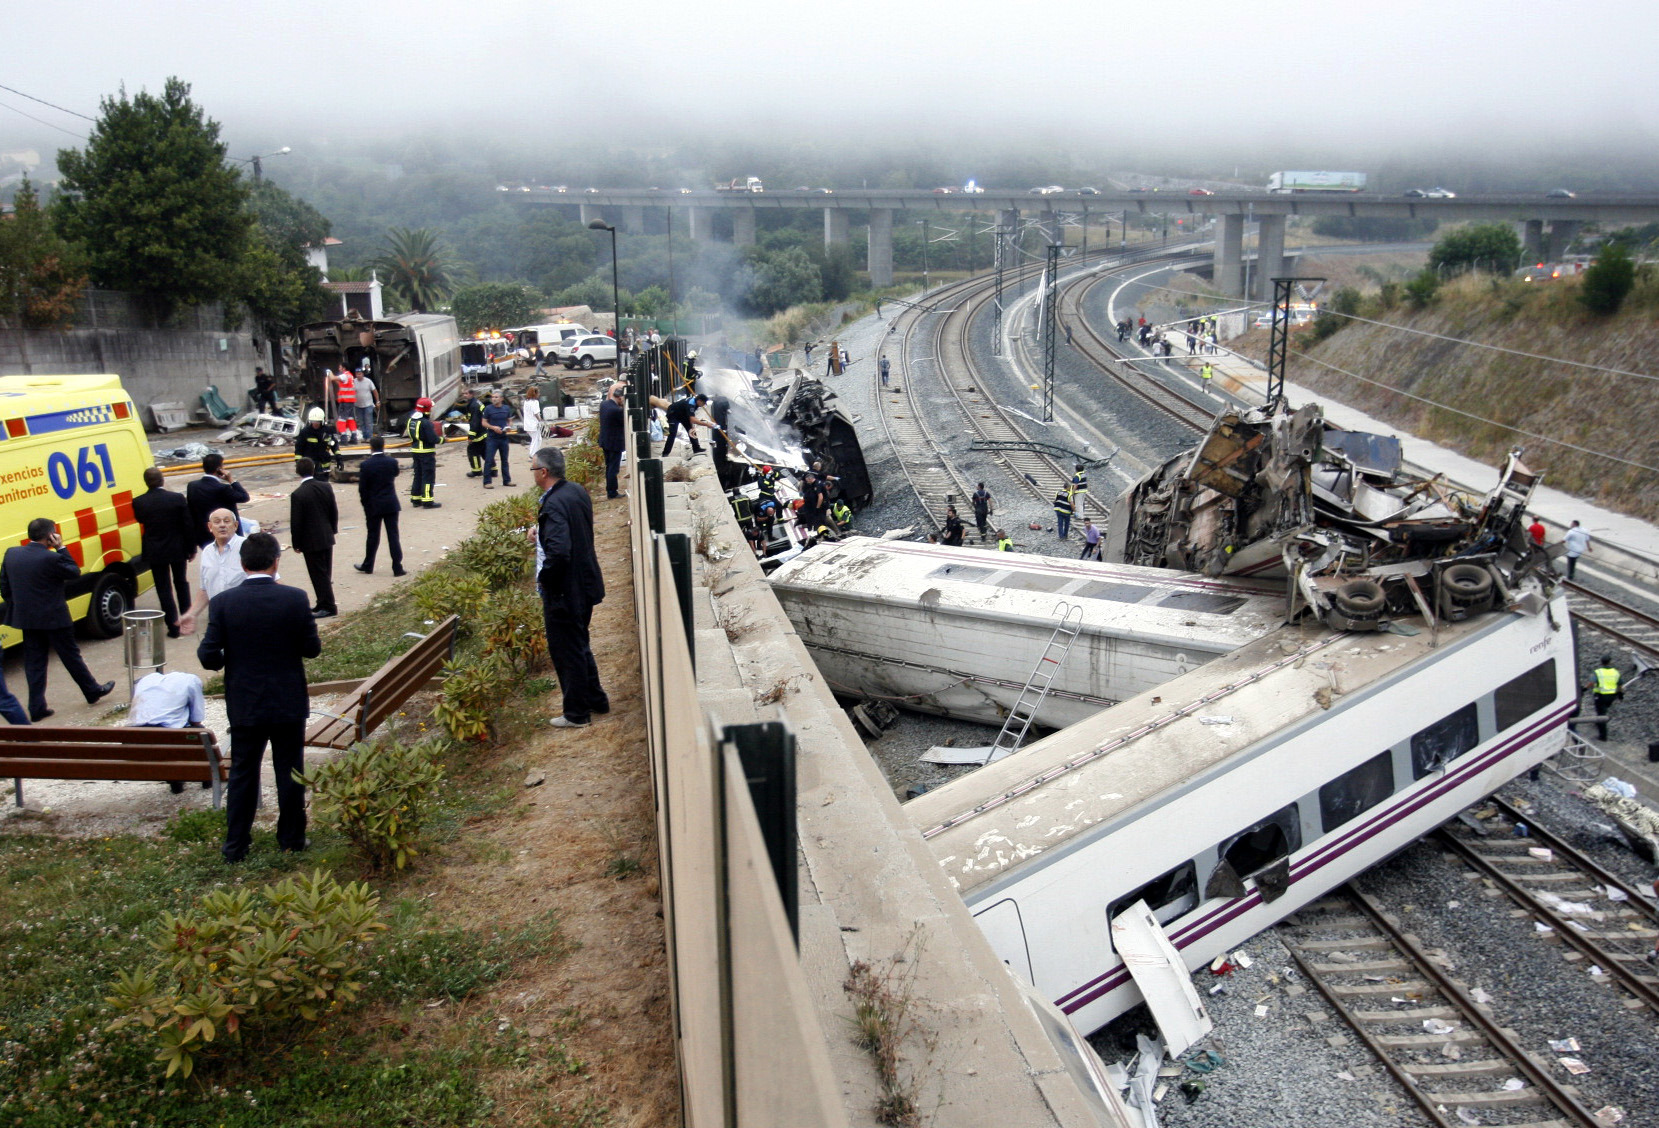 Rescuers work at the site where the train crashed. Photo: Xinhua